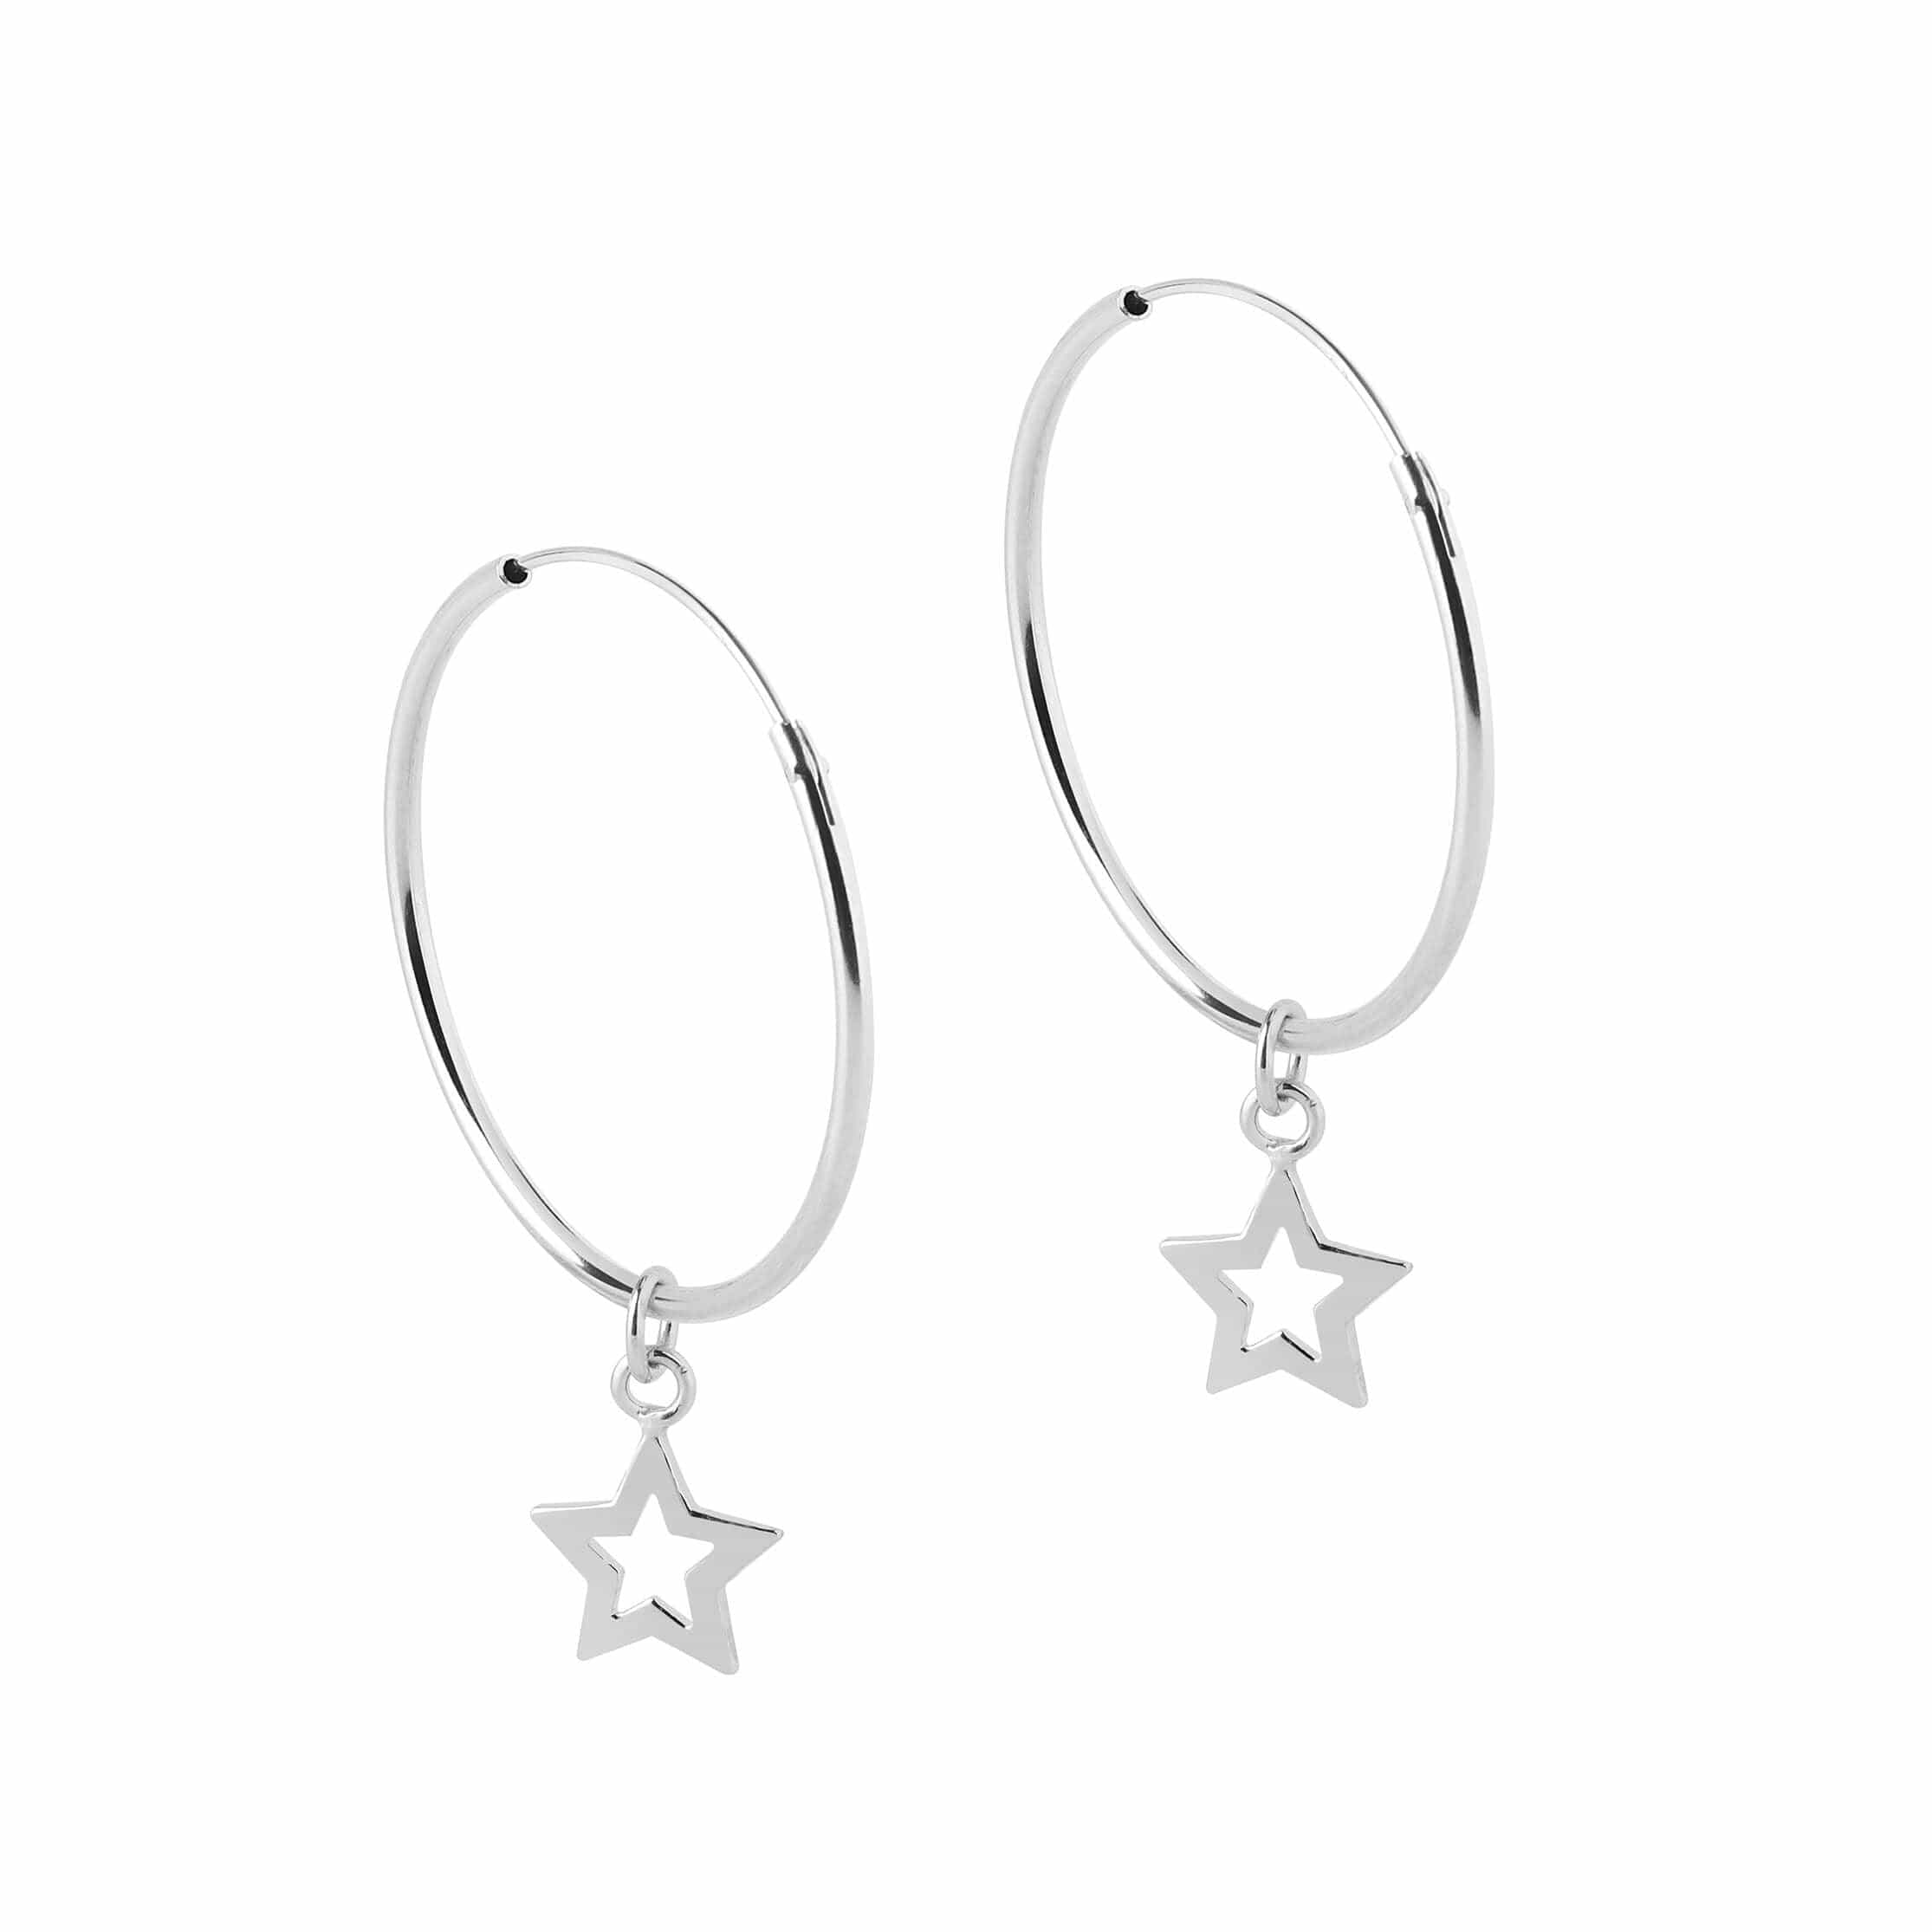 GIVA 925 Sterling Silver Mini Star Hoop Earrings | Valentines Gift for  Girlfriend, Gifts for Girls and Women | With Certificate of Authenticity  and 925 Stamp | 6 Month Warranty* : Amazon.in: Jewellery